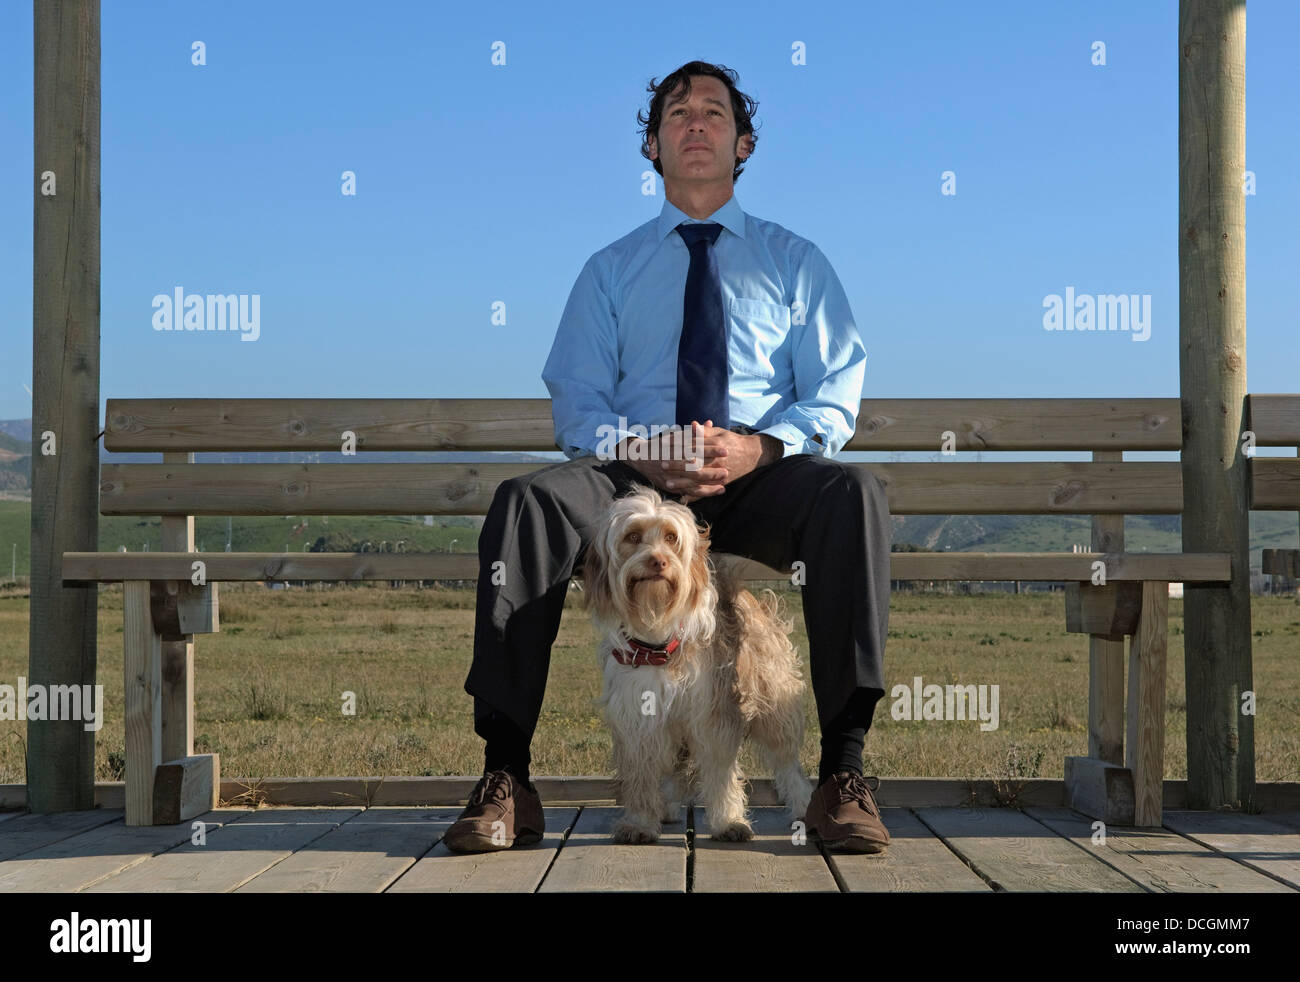 Man Sitting Outdoors With Dog Stock Photo